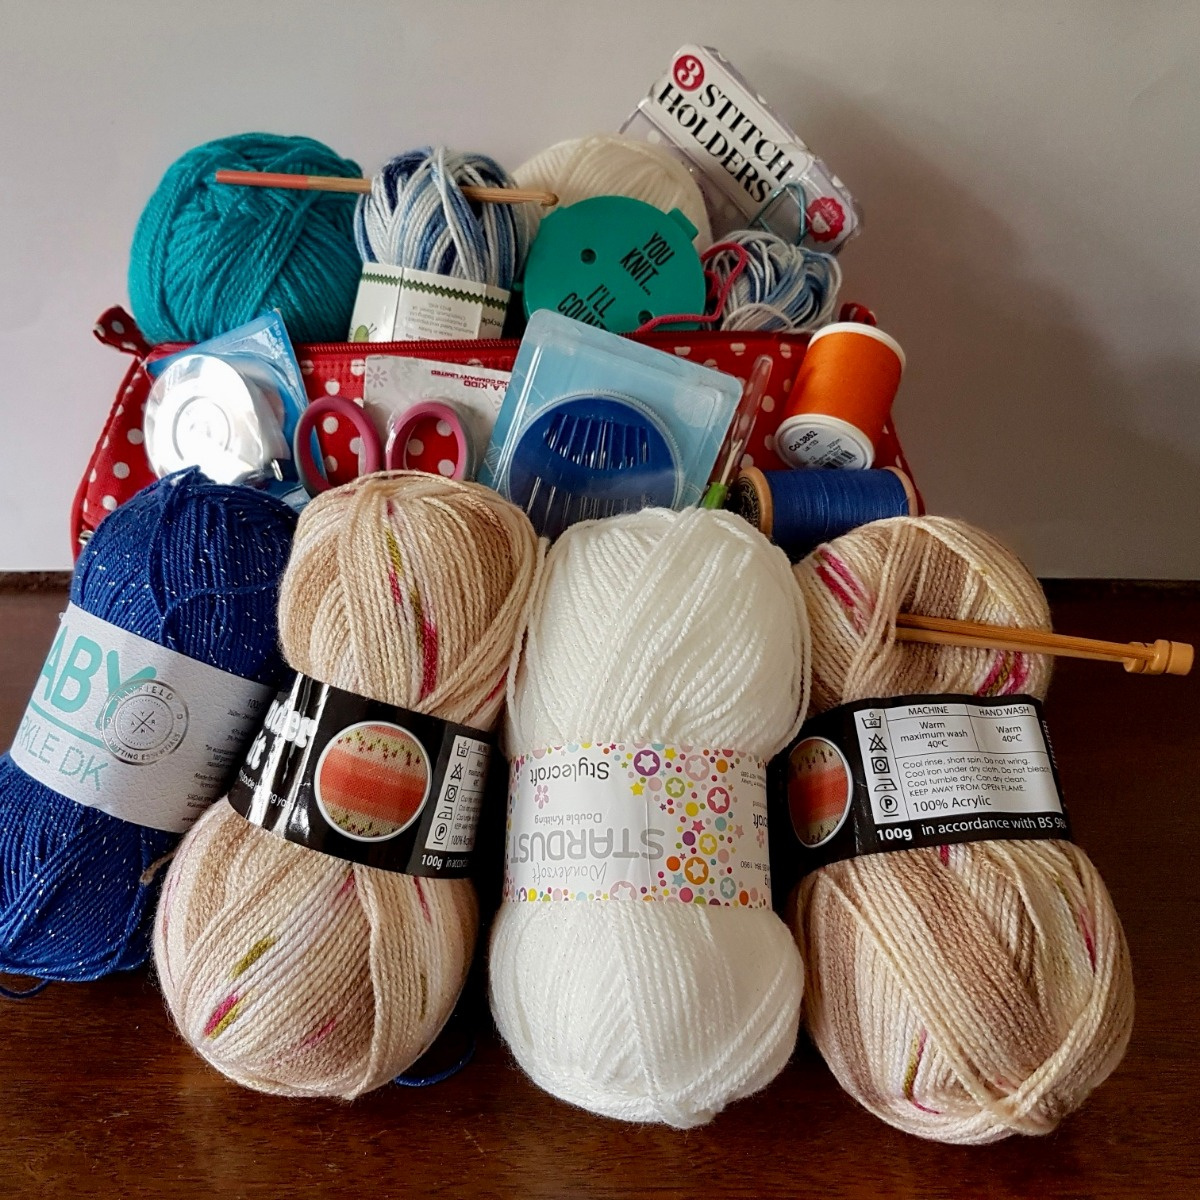 A bundle of yarn, needles and haberdashery items for refugees